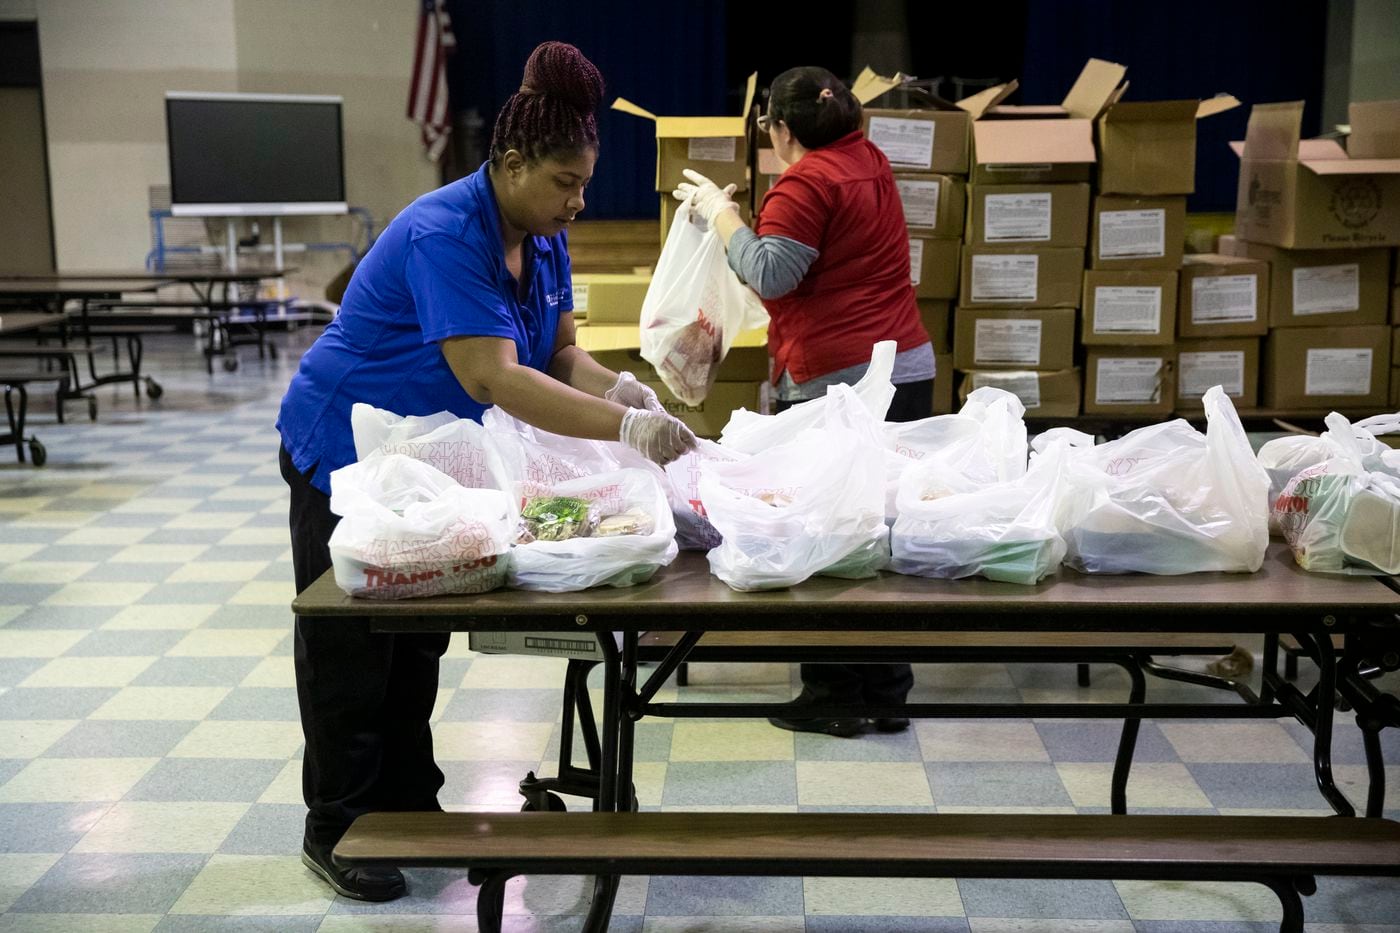 Shaleice Dudley (left), a food service worker at John H. Webster Elementary School, pasks grab-and-go meals for distribution to students and families in March after the Philadelphia School District switched to remote learning.